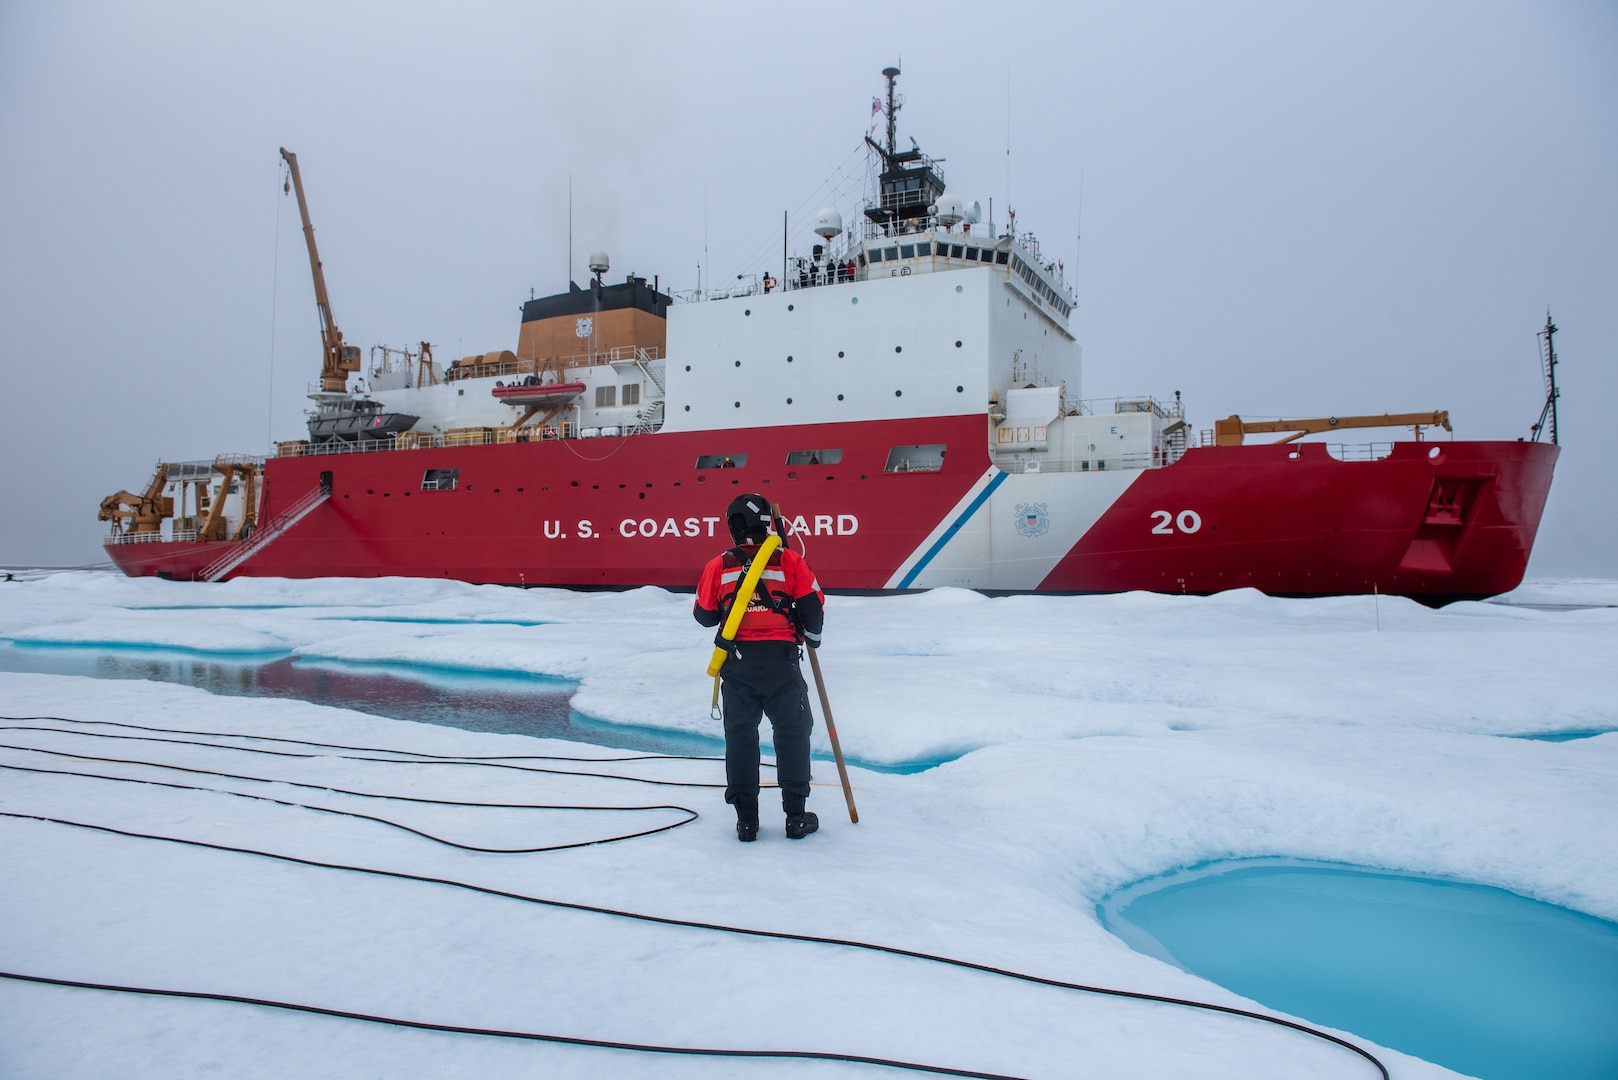 A member of the ice rescue team maintains look-out as U.S. Coast Guard Cutter Healy (WAGB 20) keeps station alongside a multi-year ice floe for a science evolution on in the Beaufort Sea, Aug. 9, 2023. Healy is the Coast Guard’s only icebreaker specifically designed for Arctic research, as well as the nation’s sole surface presence routinely operating in the Arctic Ocean. (Coast Guard photo by Petty Officer 3rd Class Briana Carter)